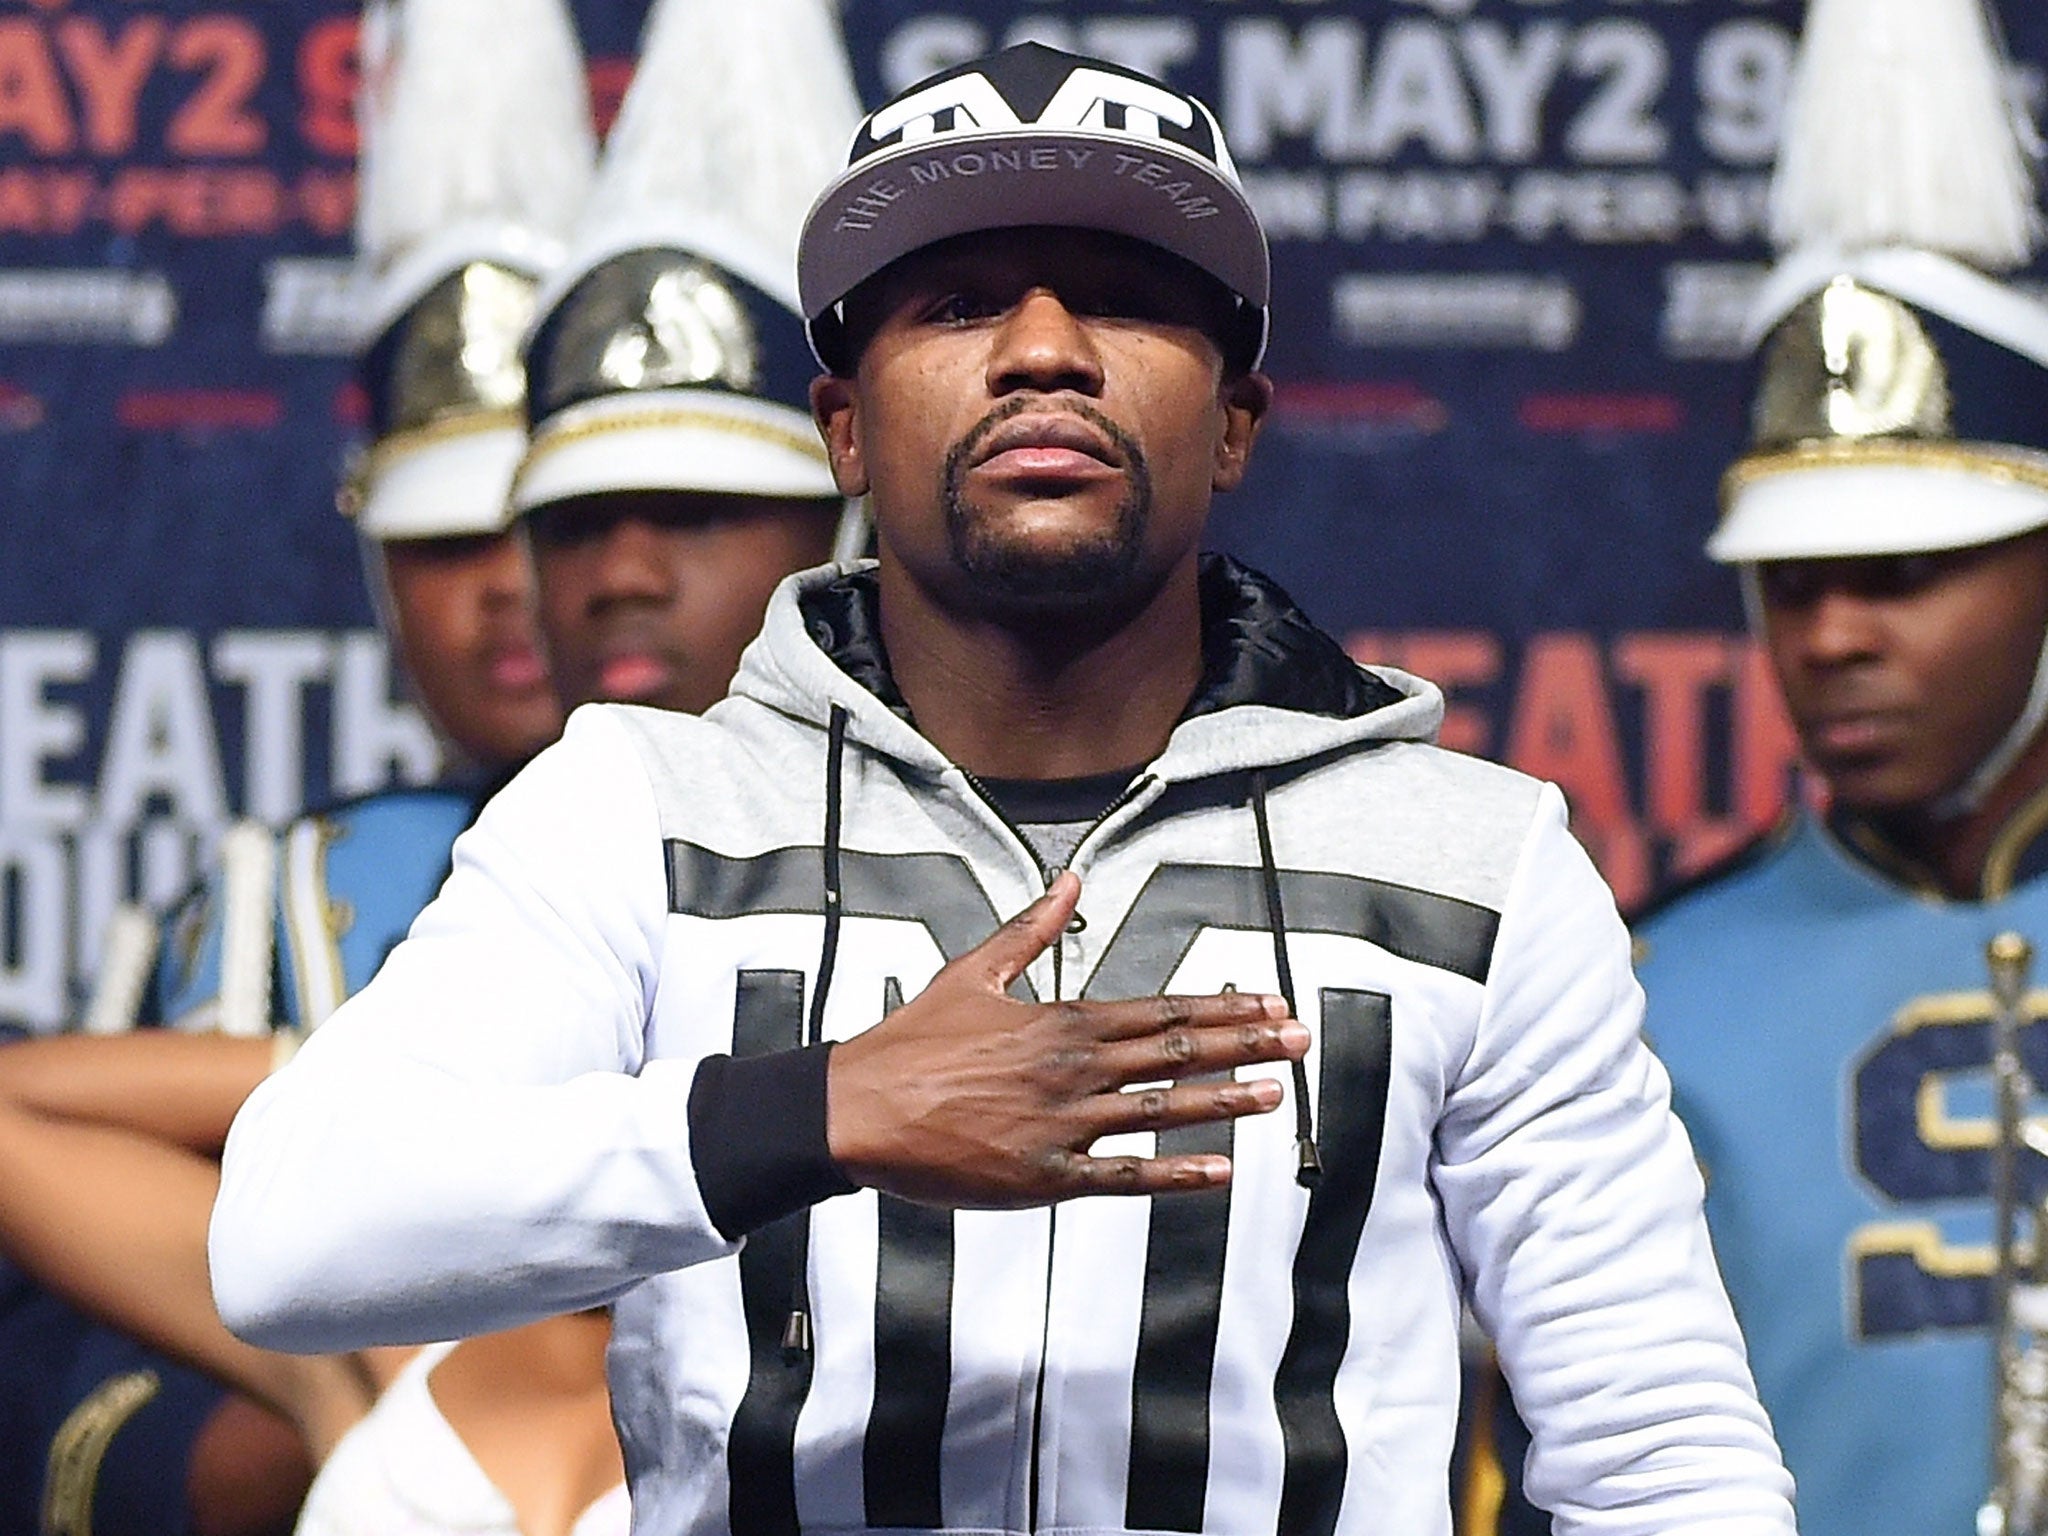 Floyd Mayweather at the MGM Arena this week